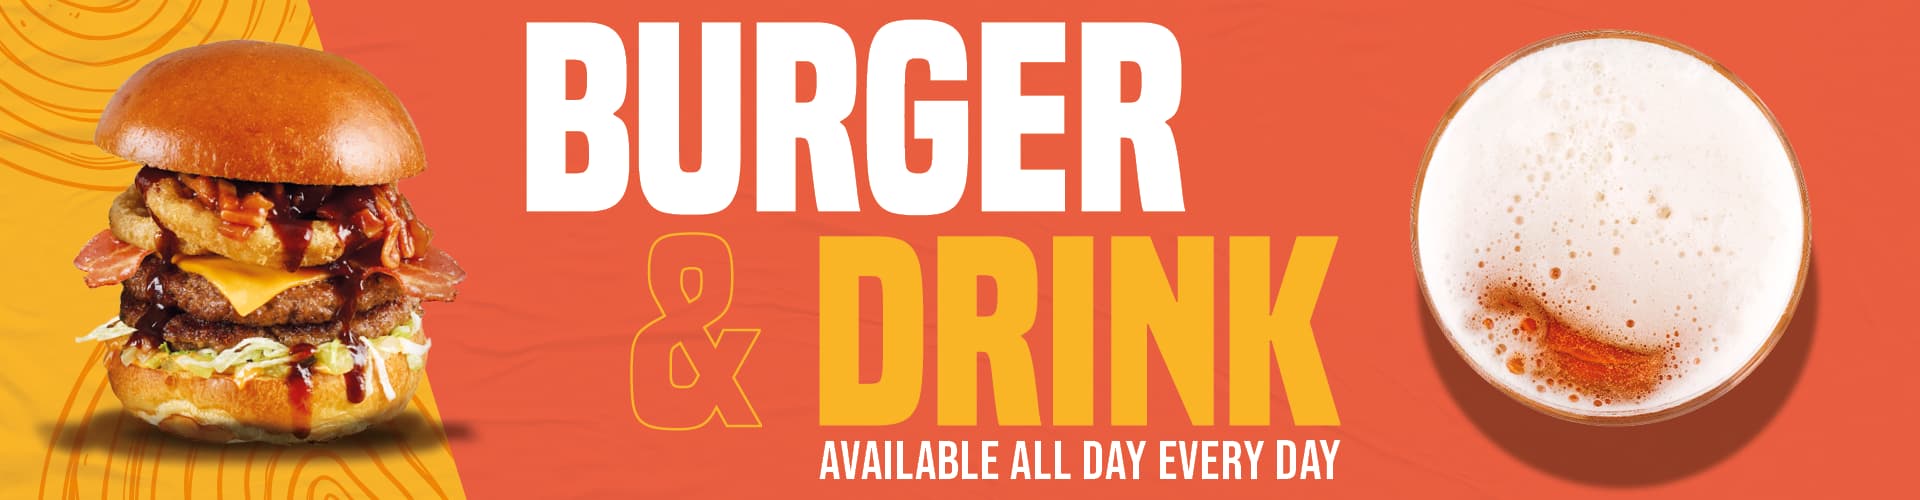 Burger & Drink - Available All Day Every Day